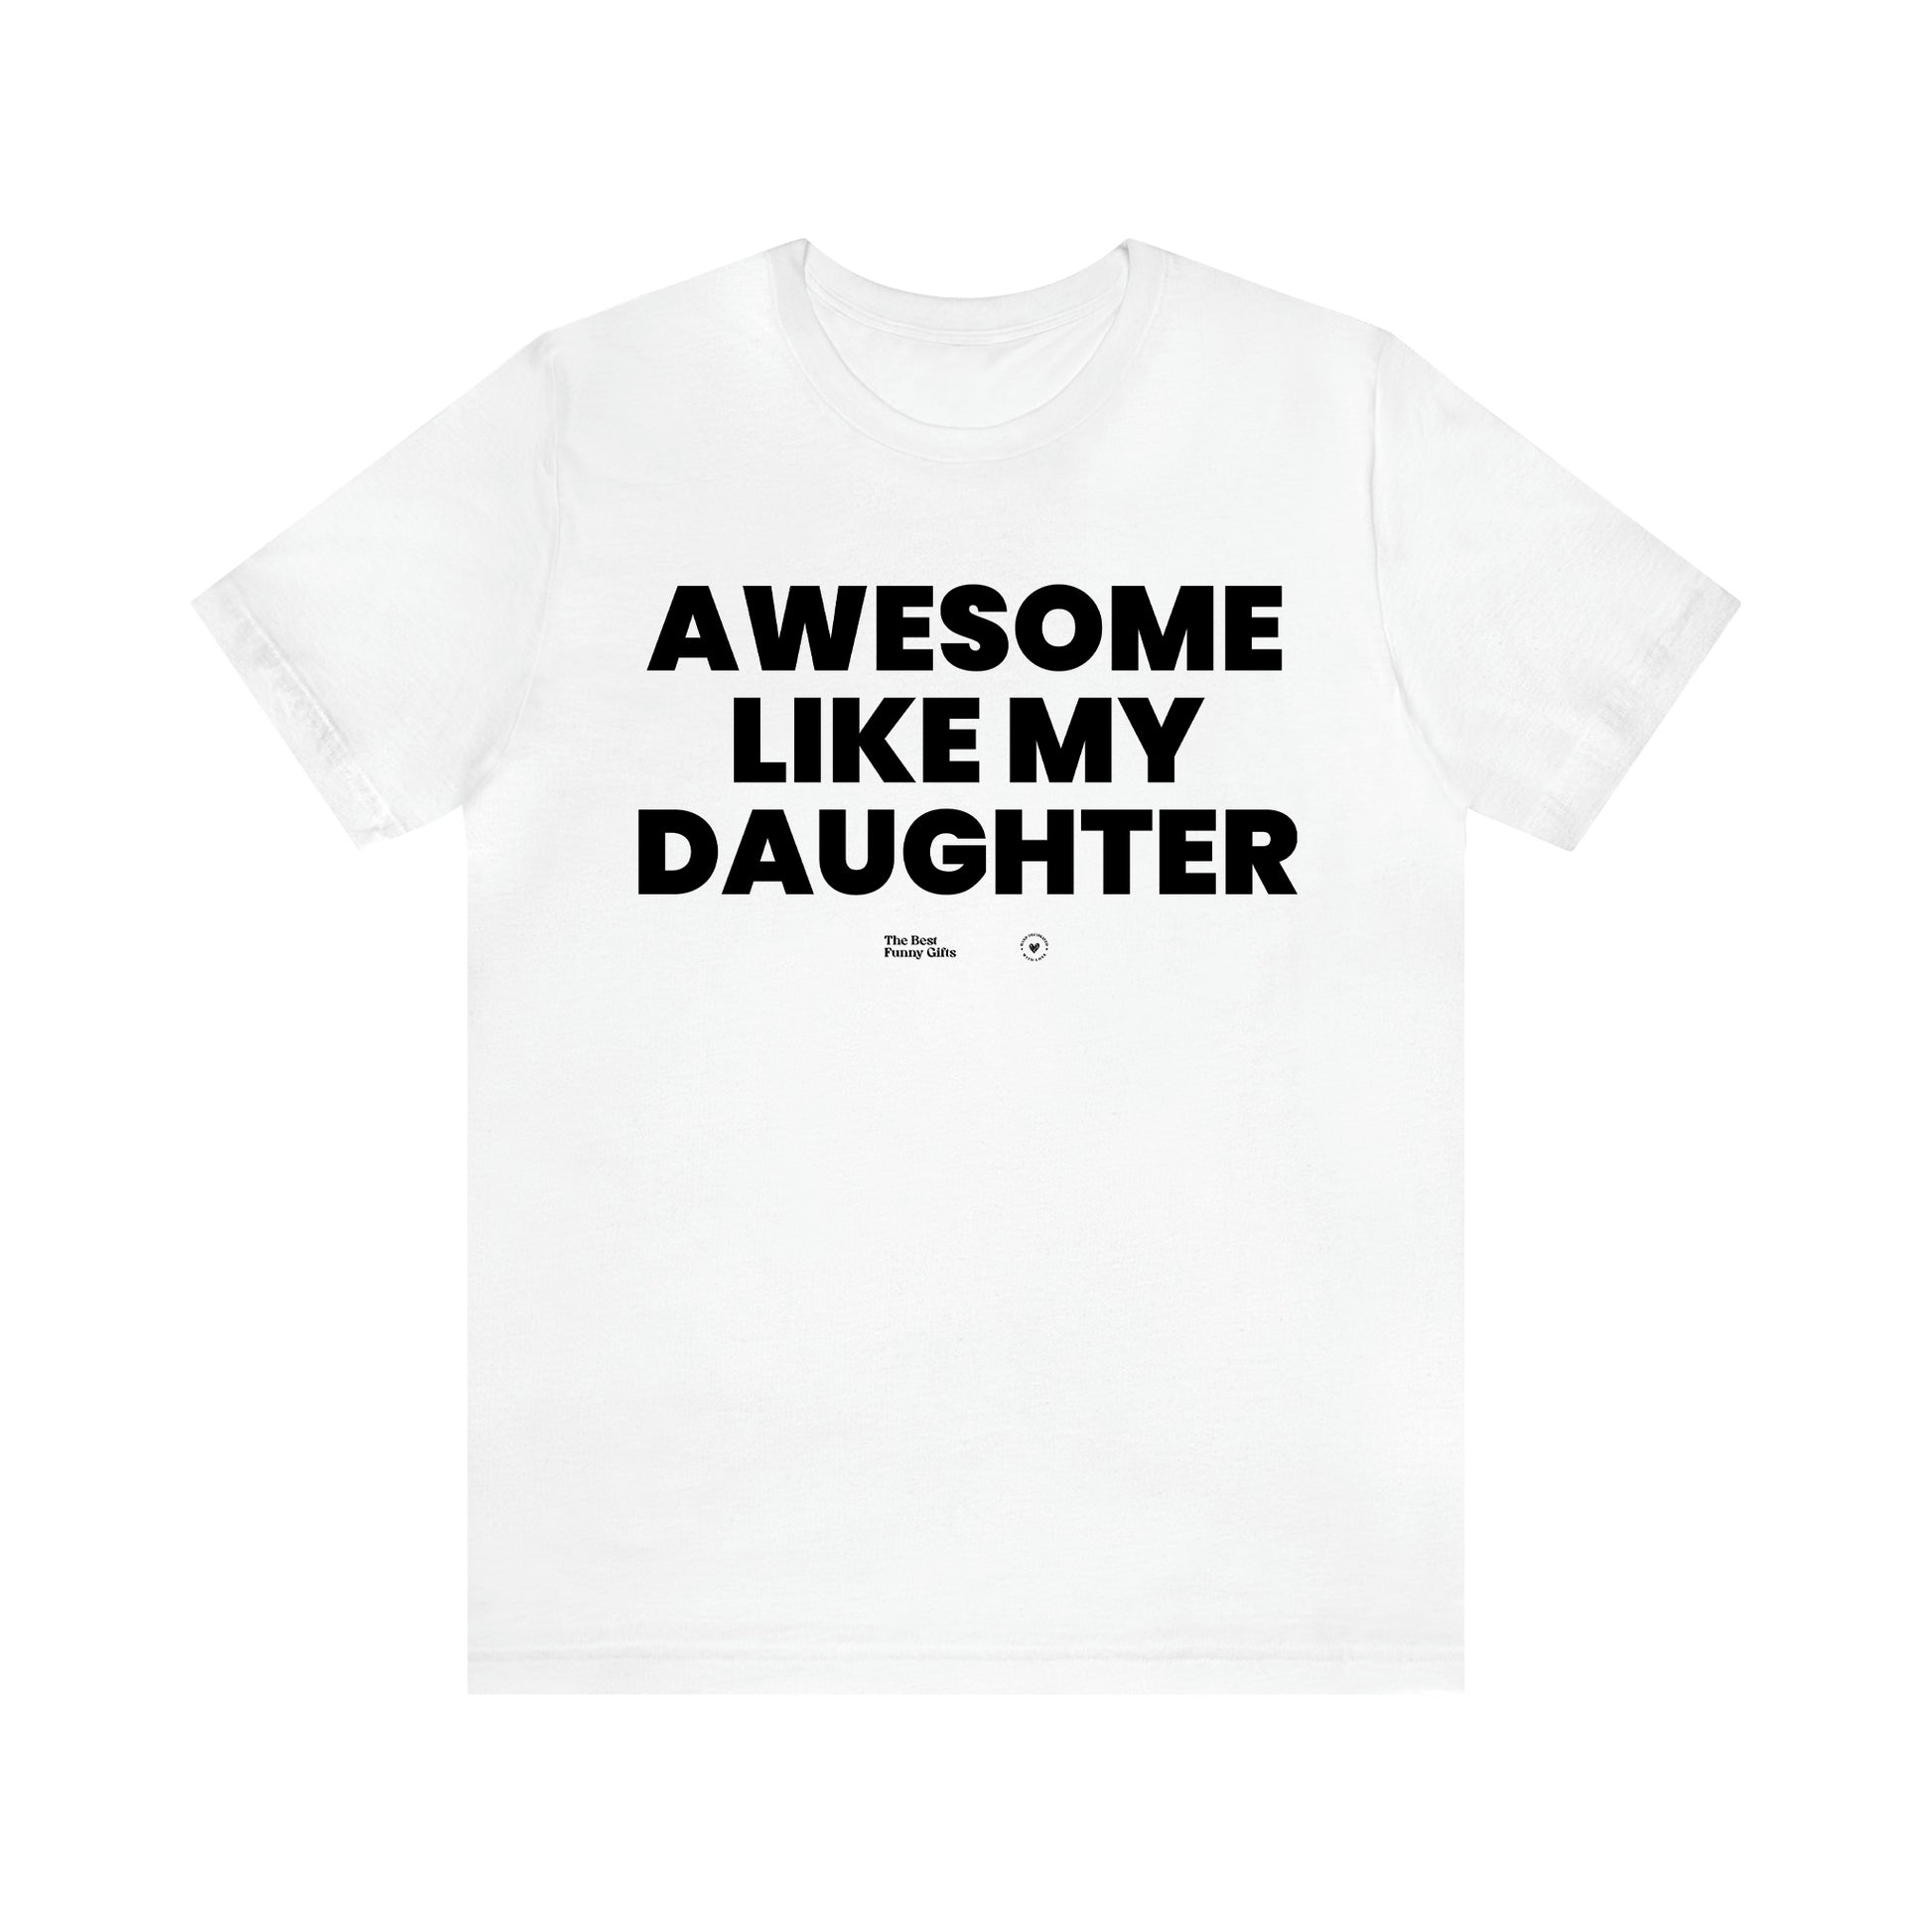 Men's T Shirts Awesome Like My Daughter - The Best Funny Gifts